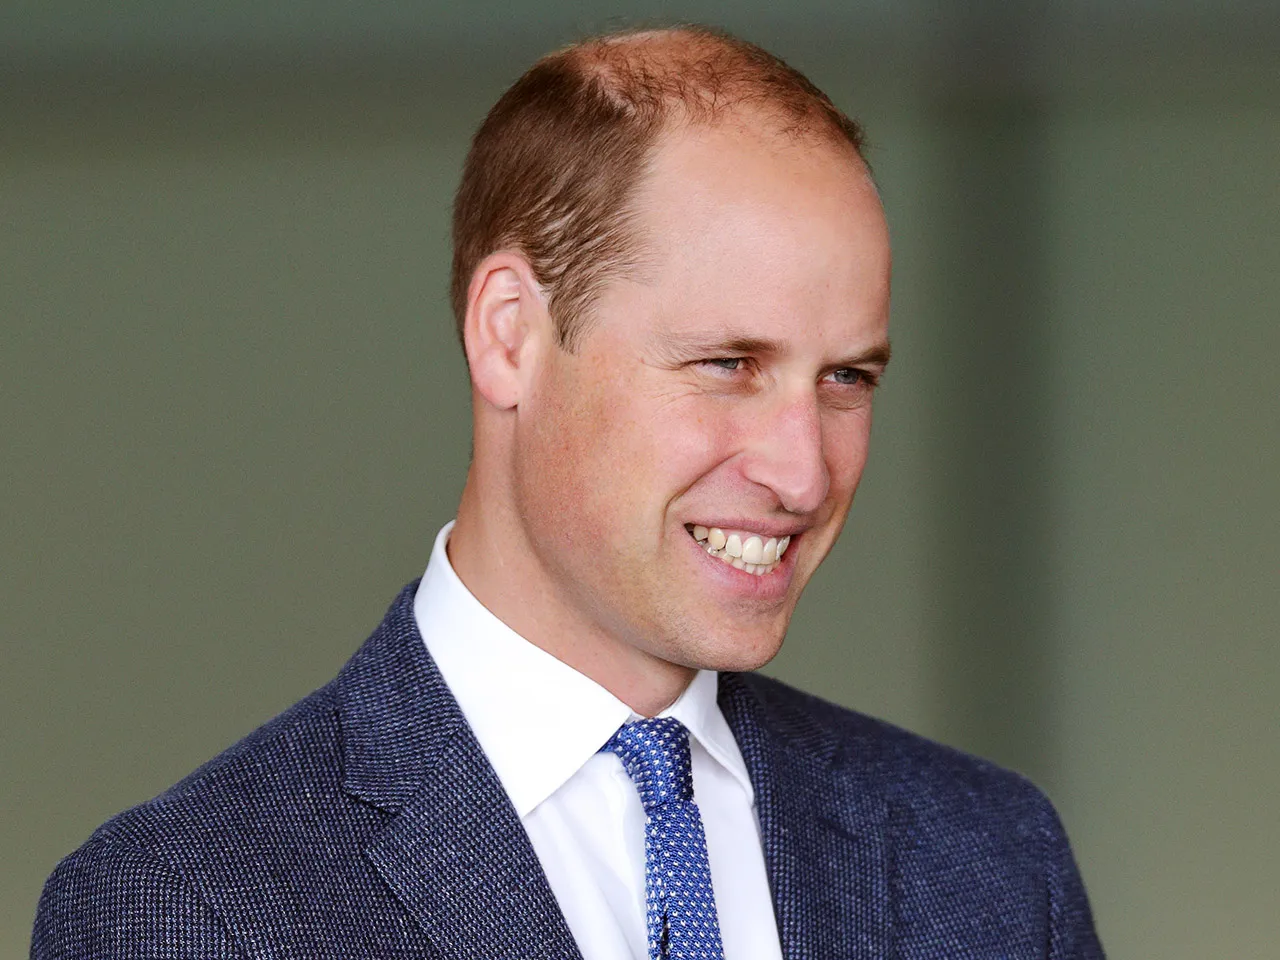 prince-william-could-see-a-full-head-of-hair-with-hair-system-or-smp-says-expert